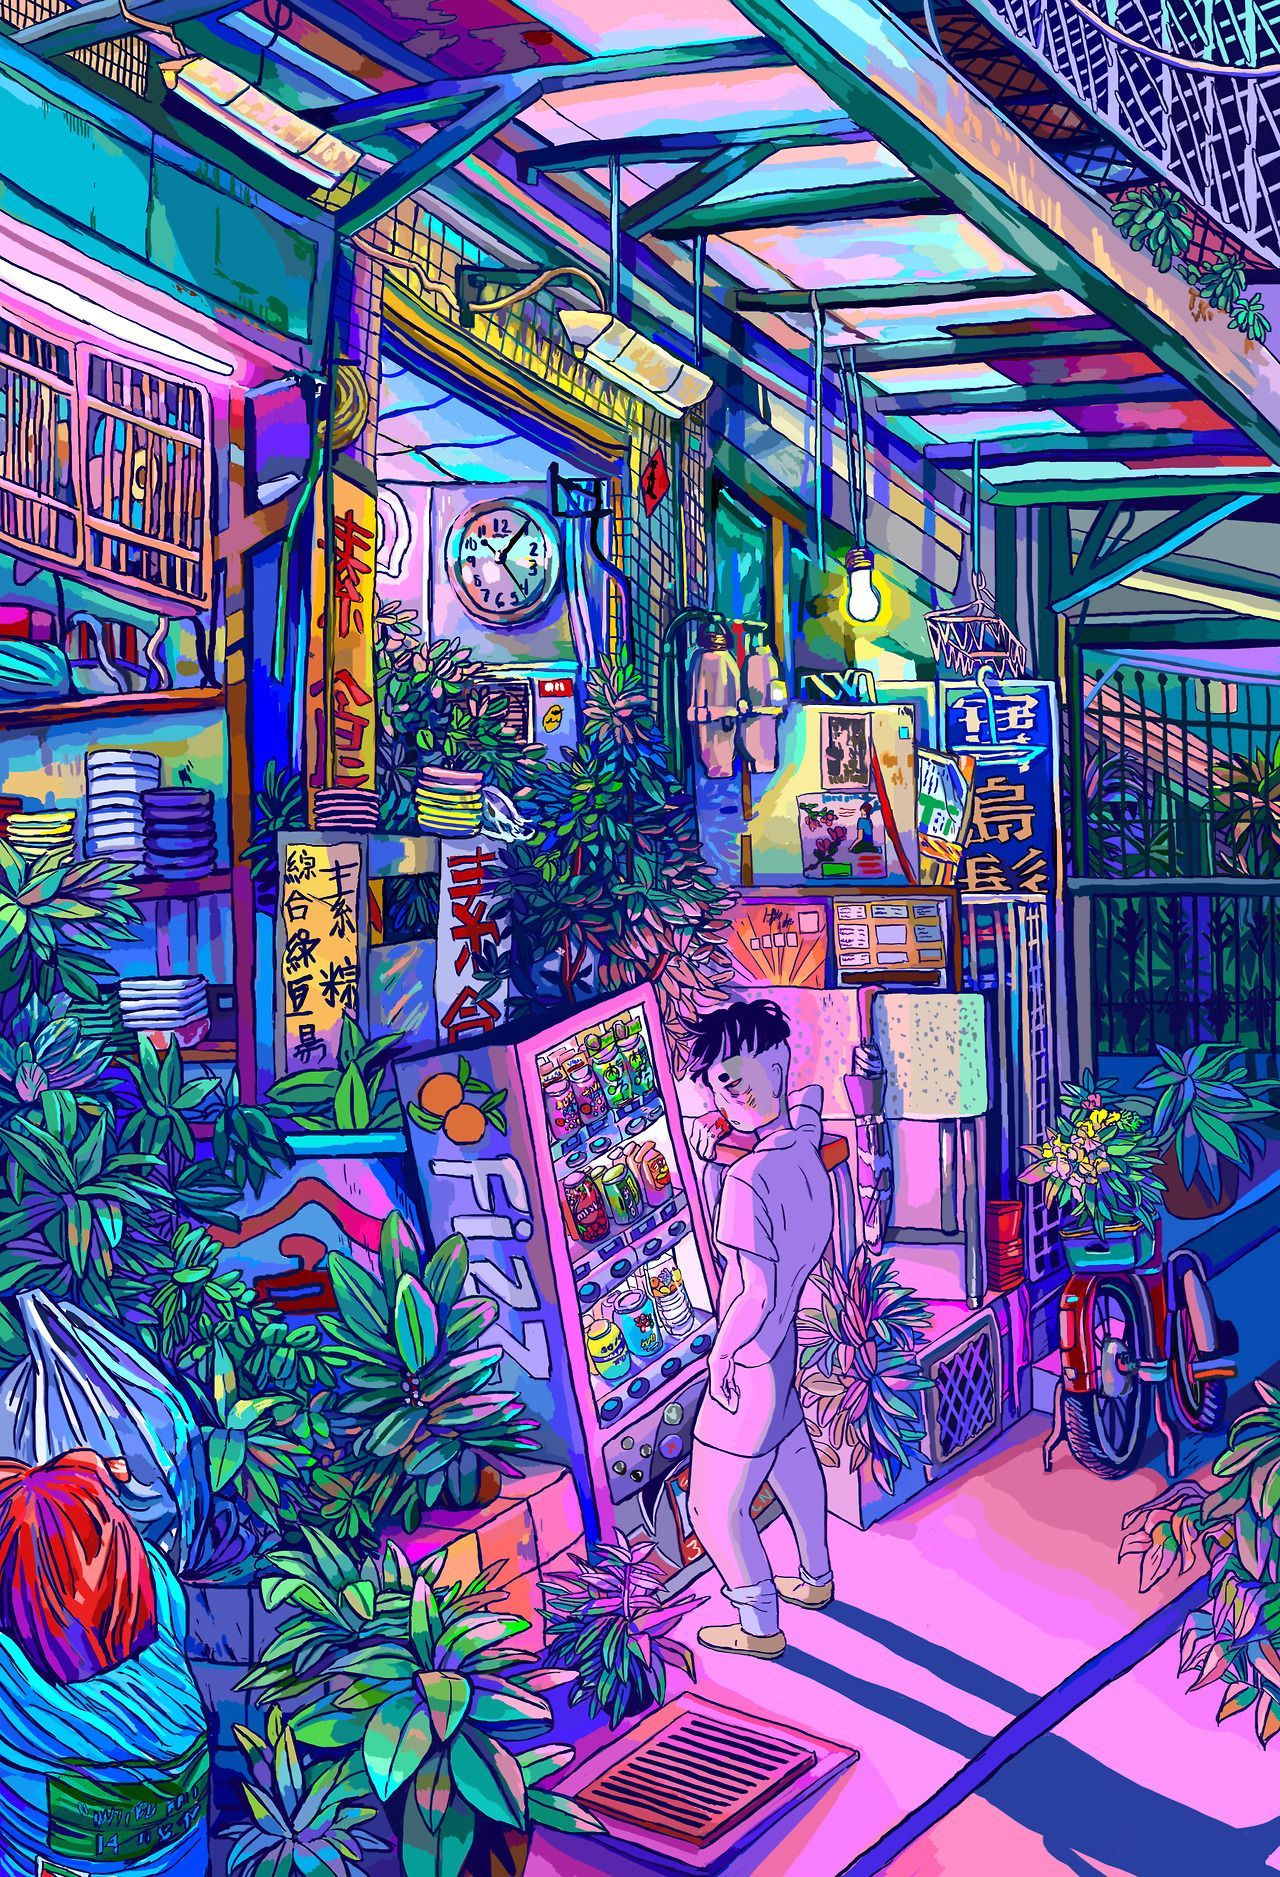 A man is standing in front of an open market - Trippy